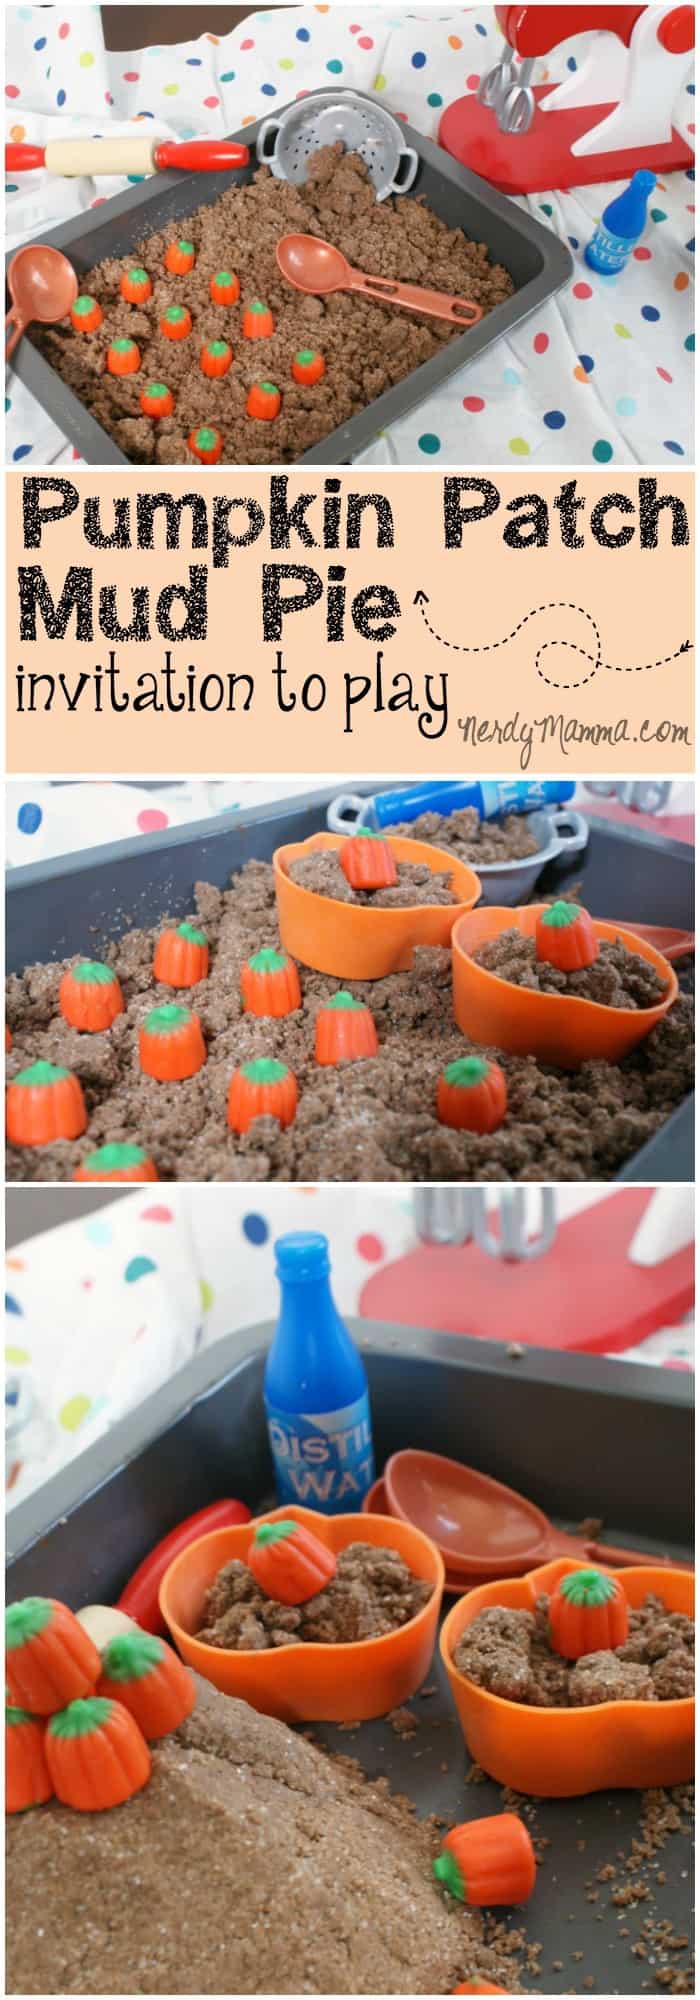 My kiddos were so excited to find this pumpkin patch mud pie invitation to play on the table. They had so much fun making edible chocolate play dough mud pies and playing with the mini pumpkins!